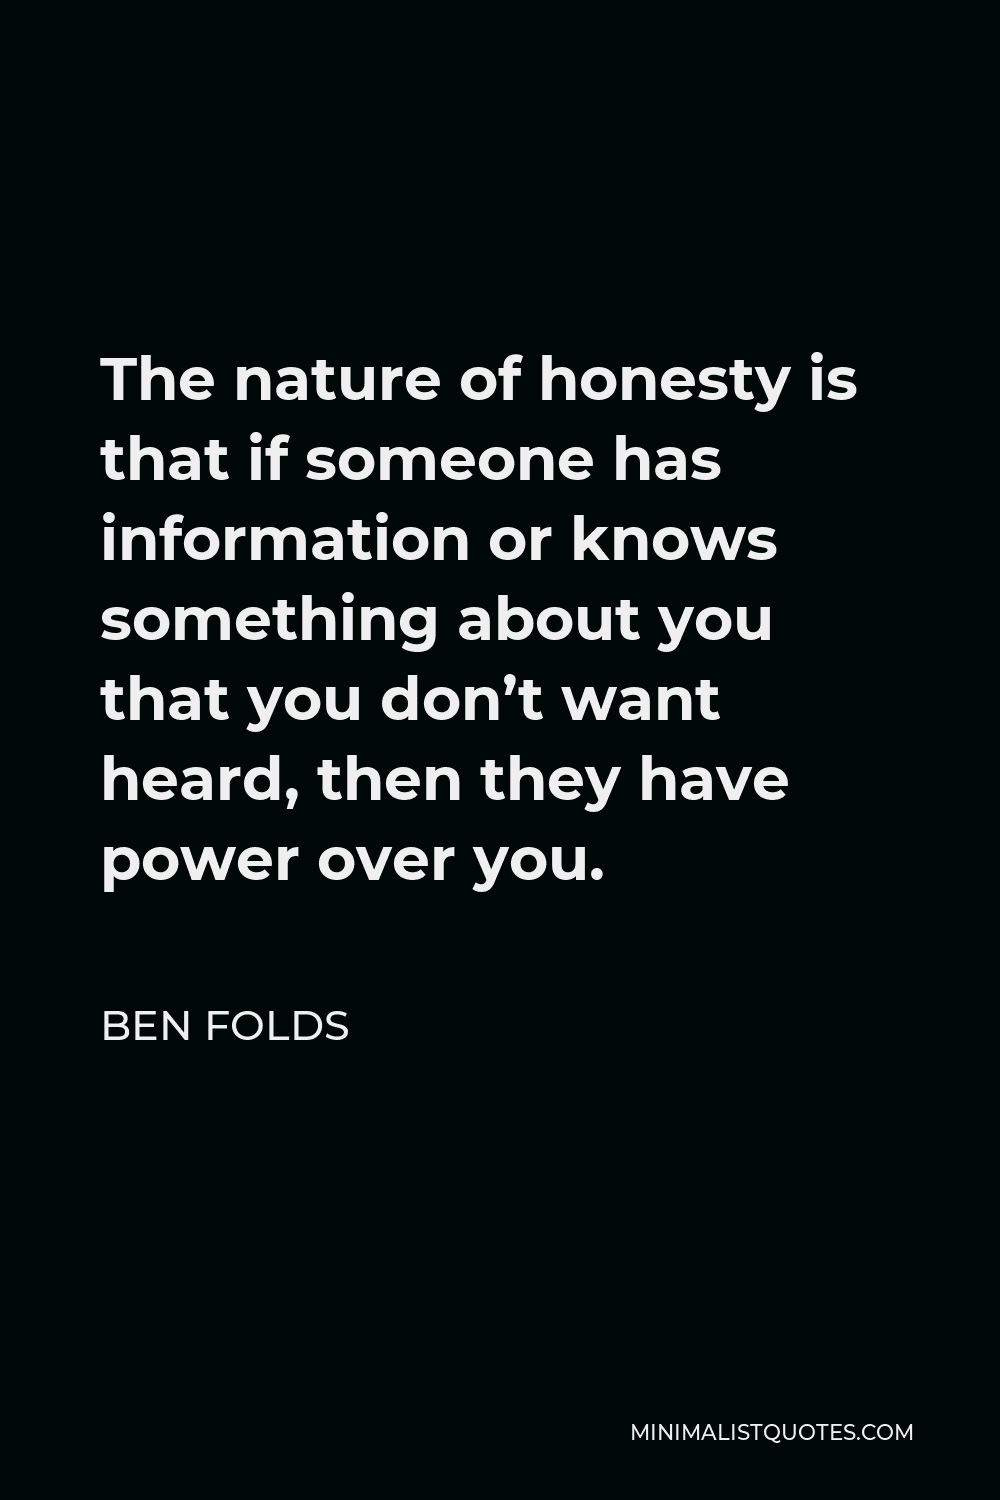 Ben Folds Quote - The nature of honesty is that if someone has information or knows something about you that you don’t want heard, then they have power over you.